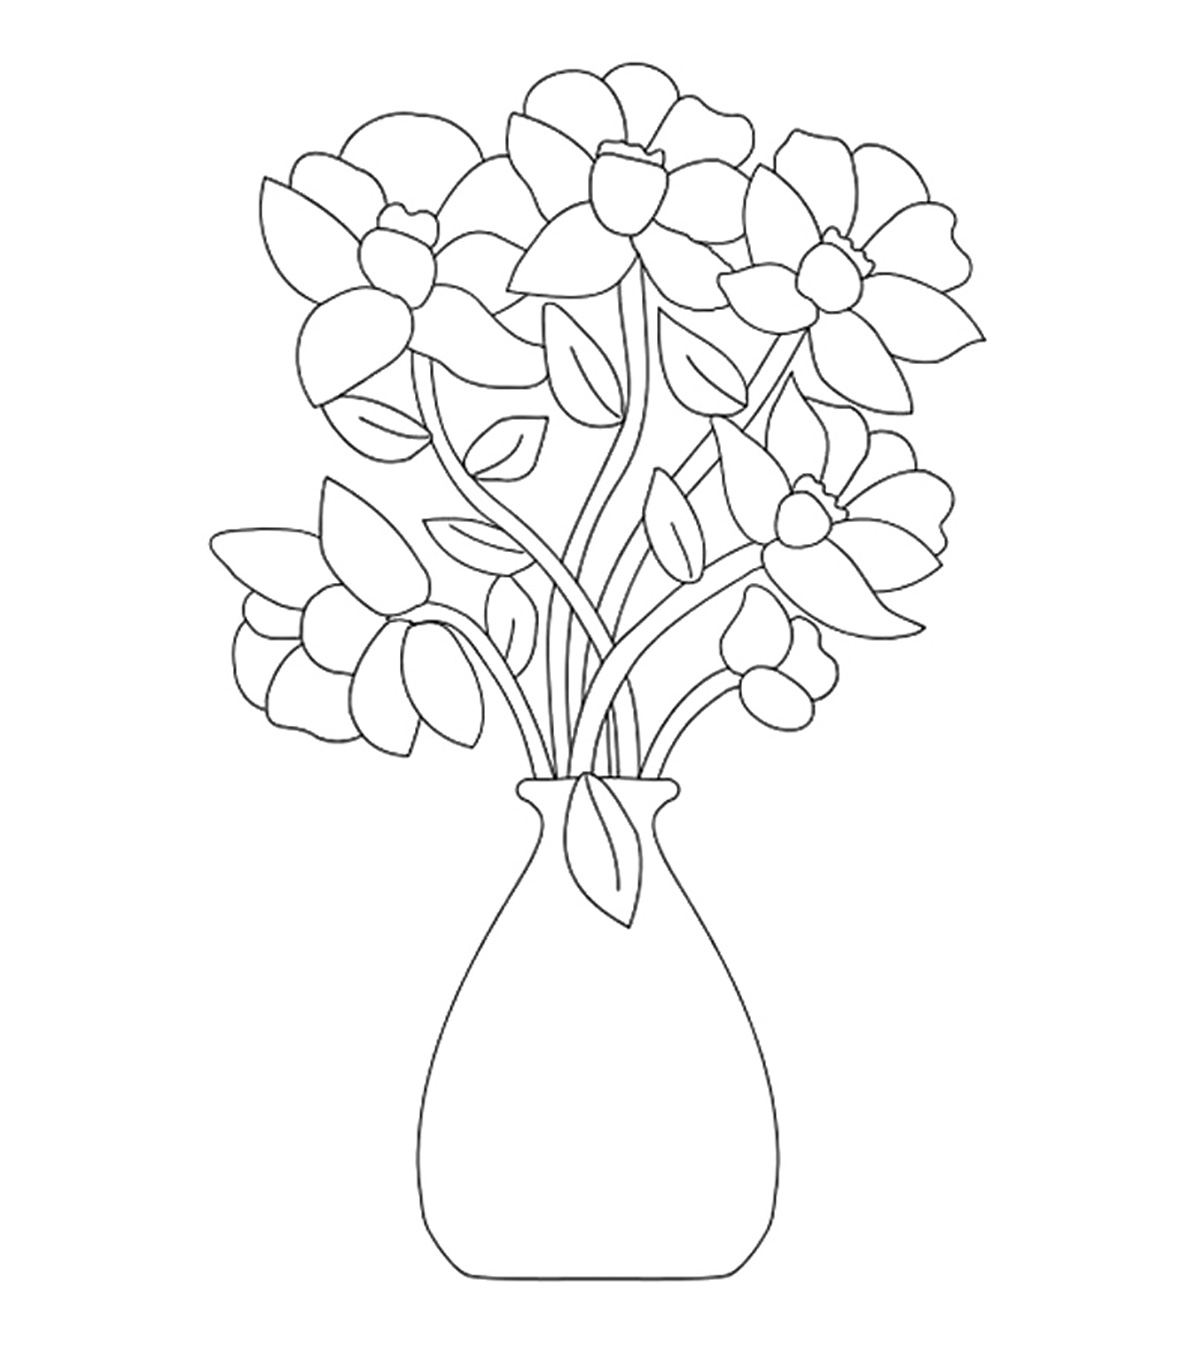 5600 Top Mini Flower Coloring Pages For Free